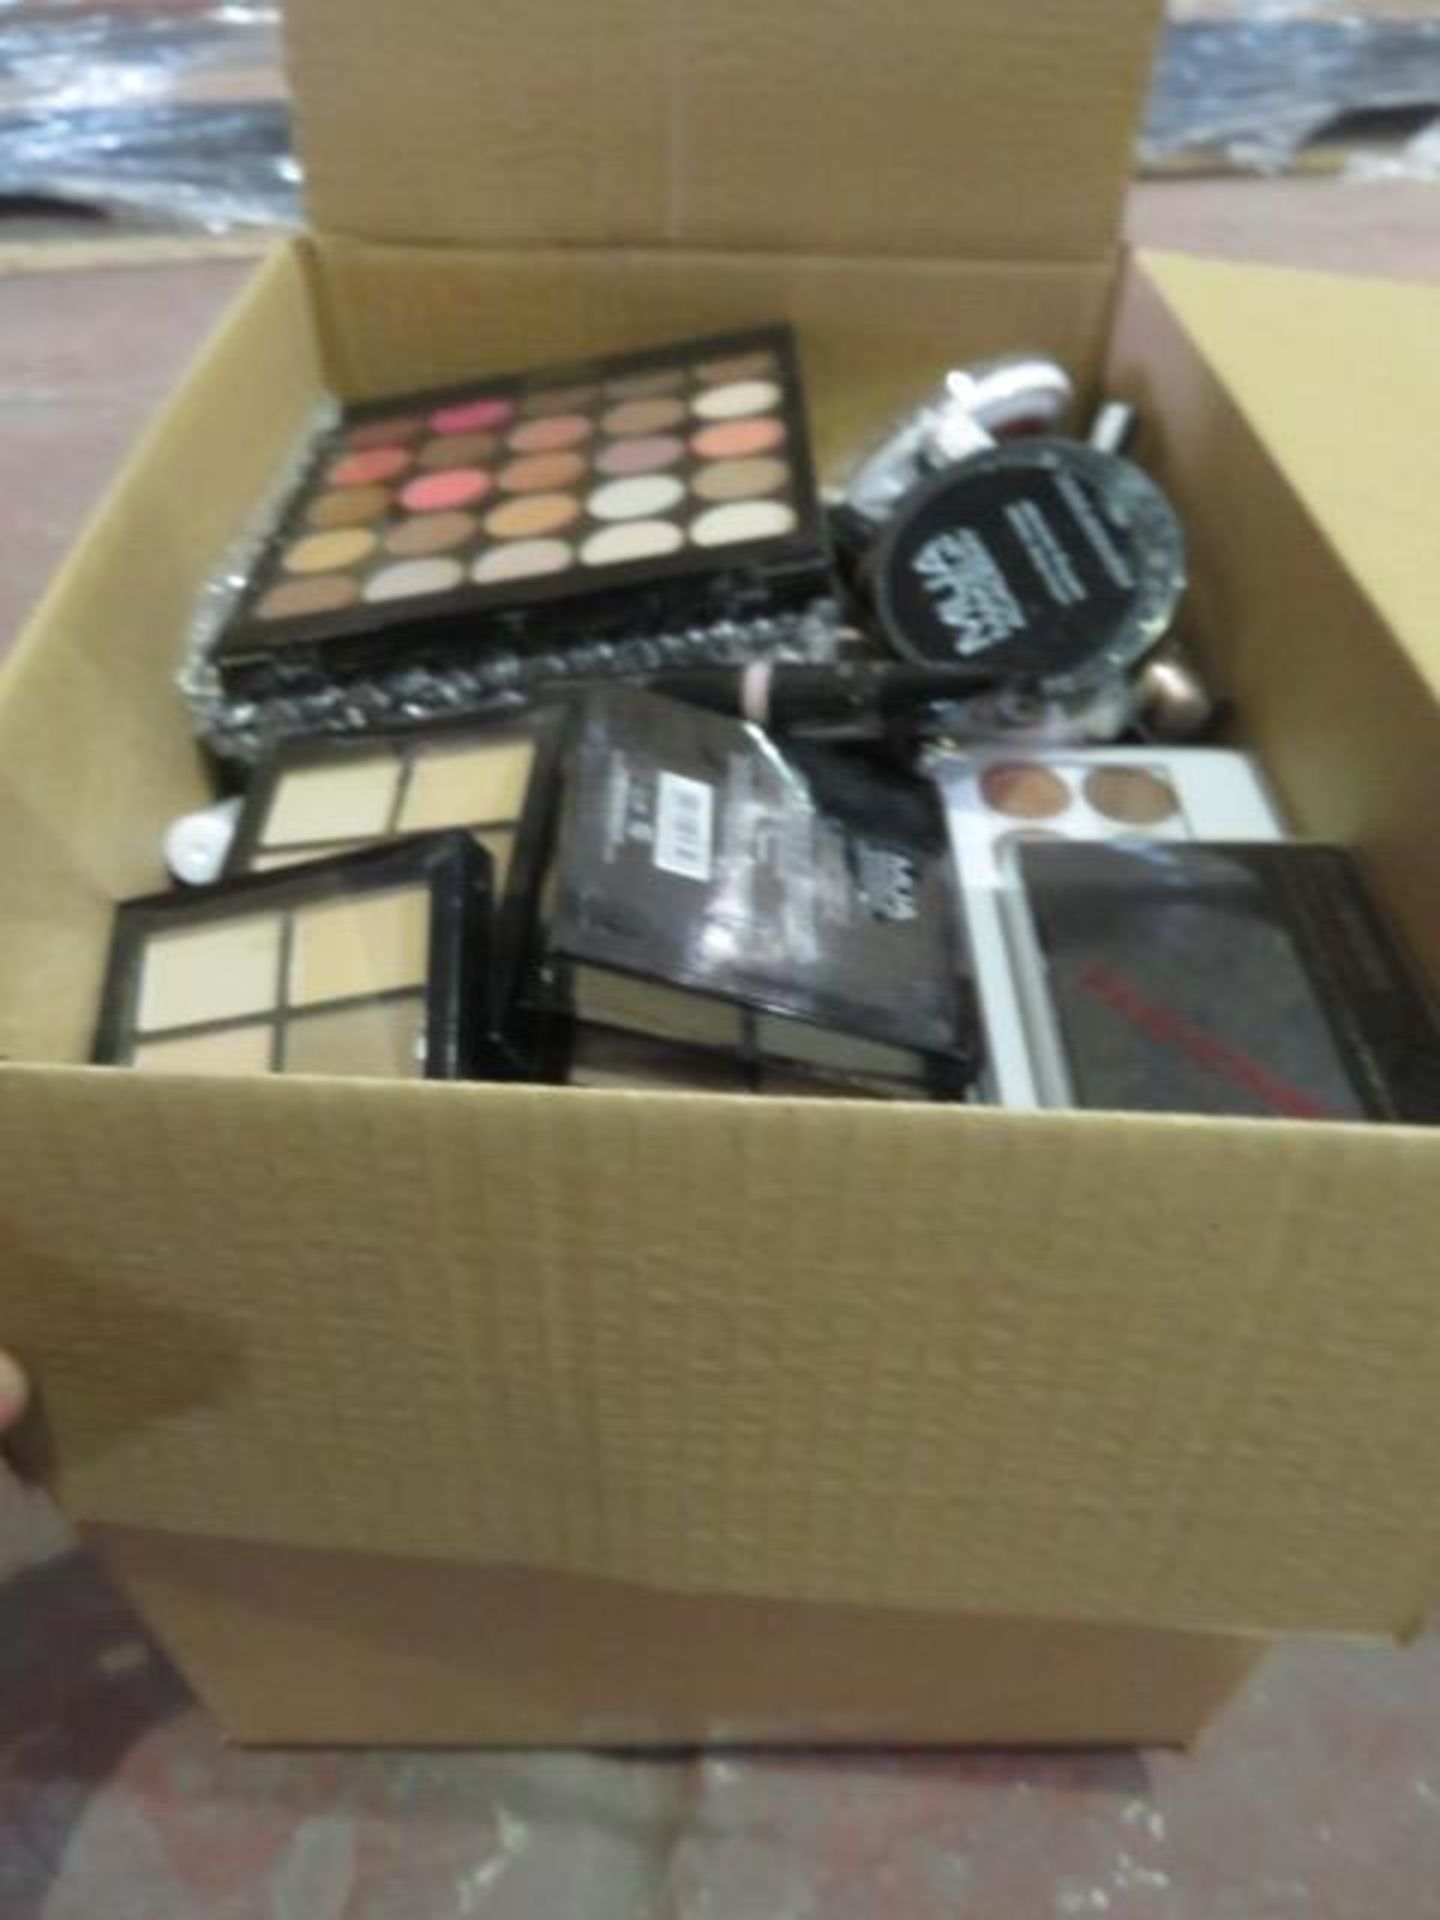 (Z95) Circa. 200 items of various new make up acadamy make up to include: ultra fine loose sett... - Image 2 of 2